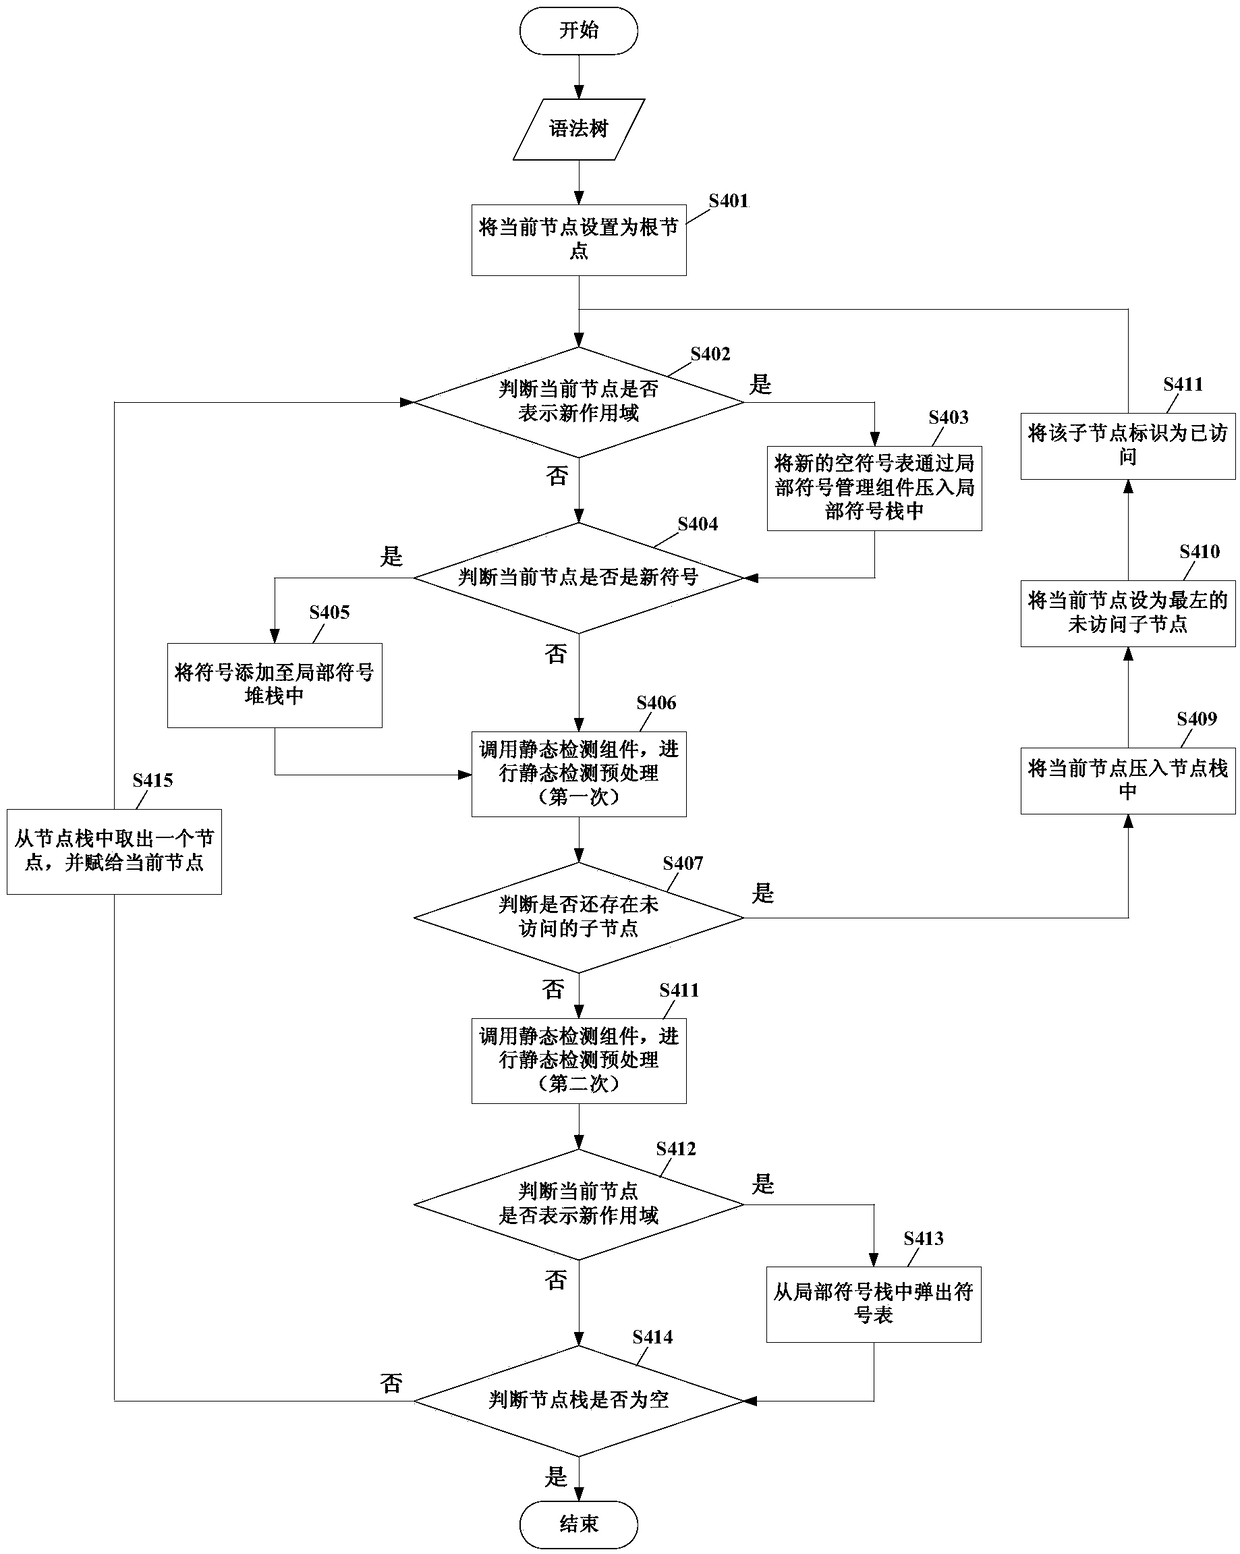 A method and system for static detection of stored procedures based on database dictionary